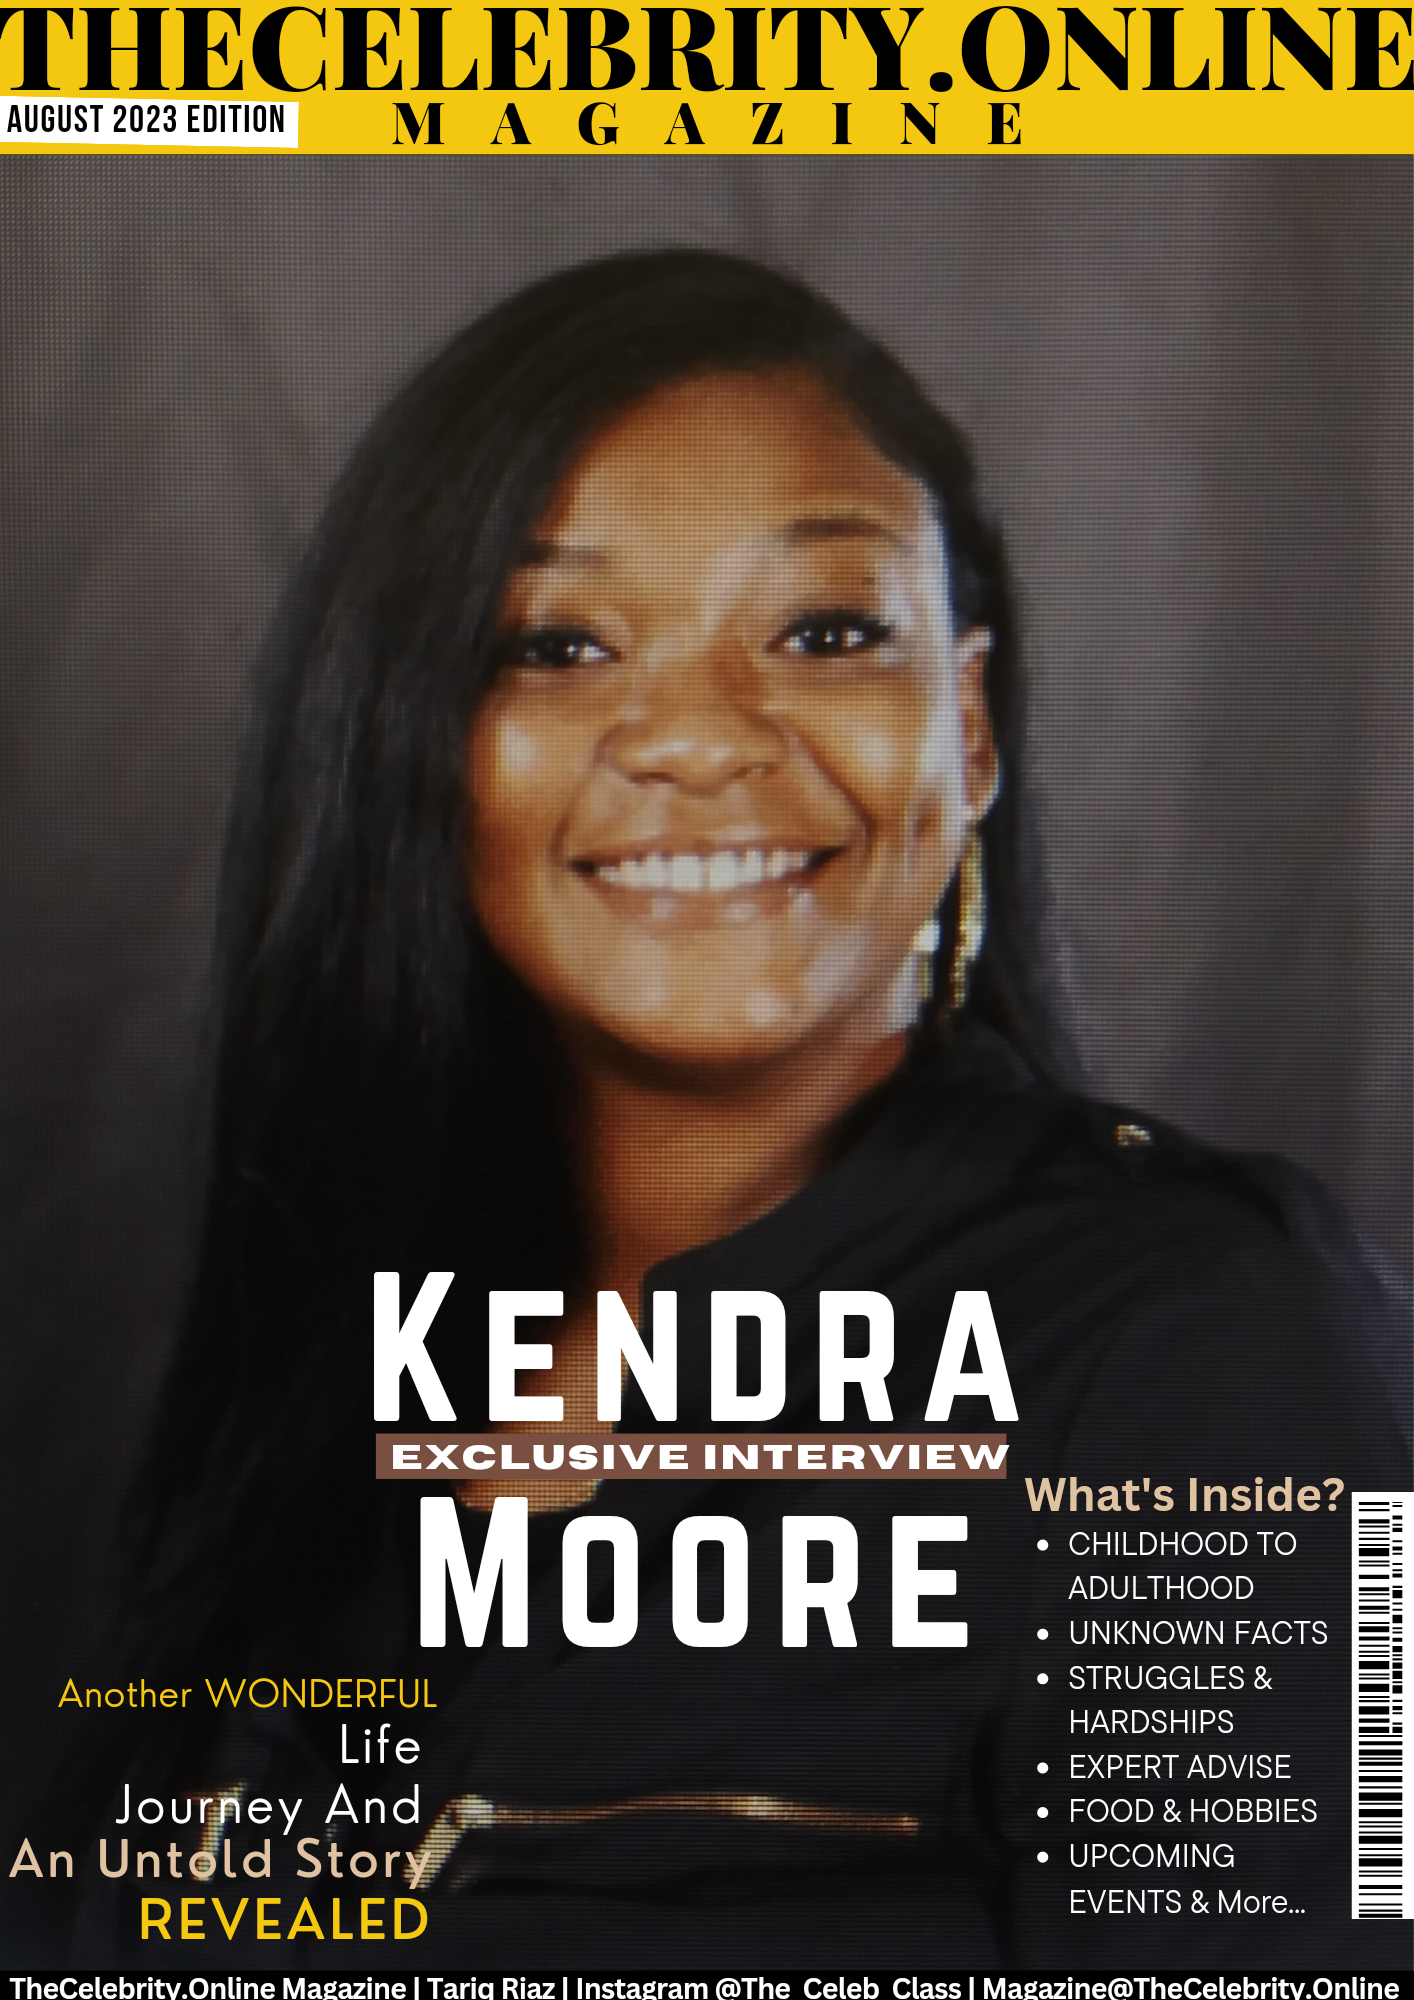 Kendra Moore Exclusive Interview – ‘Coaching Is A Self-Fulfilling Prophecy’